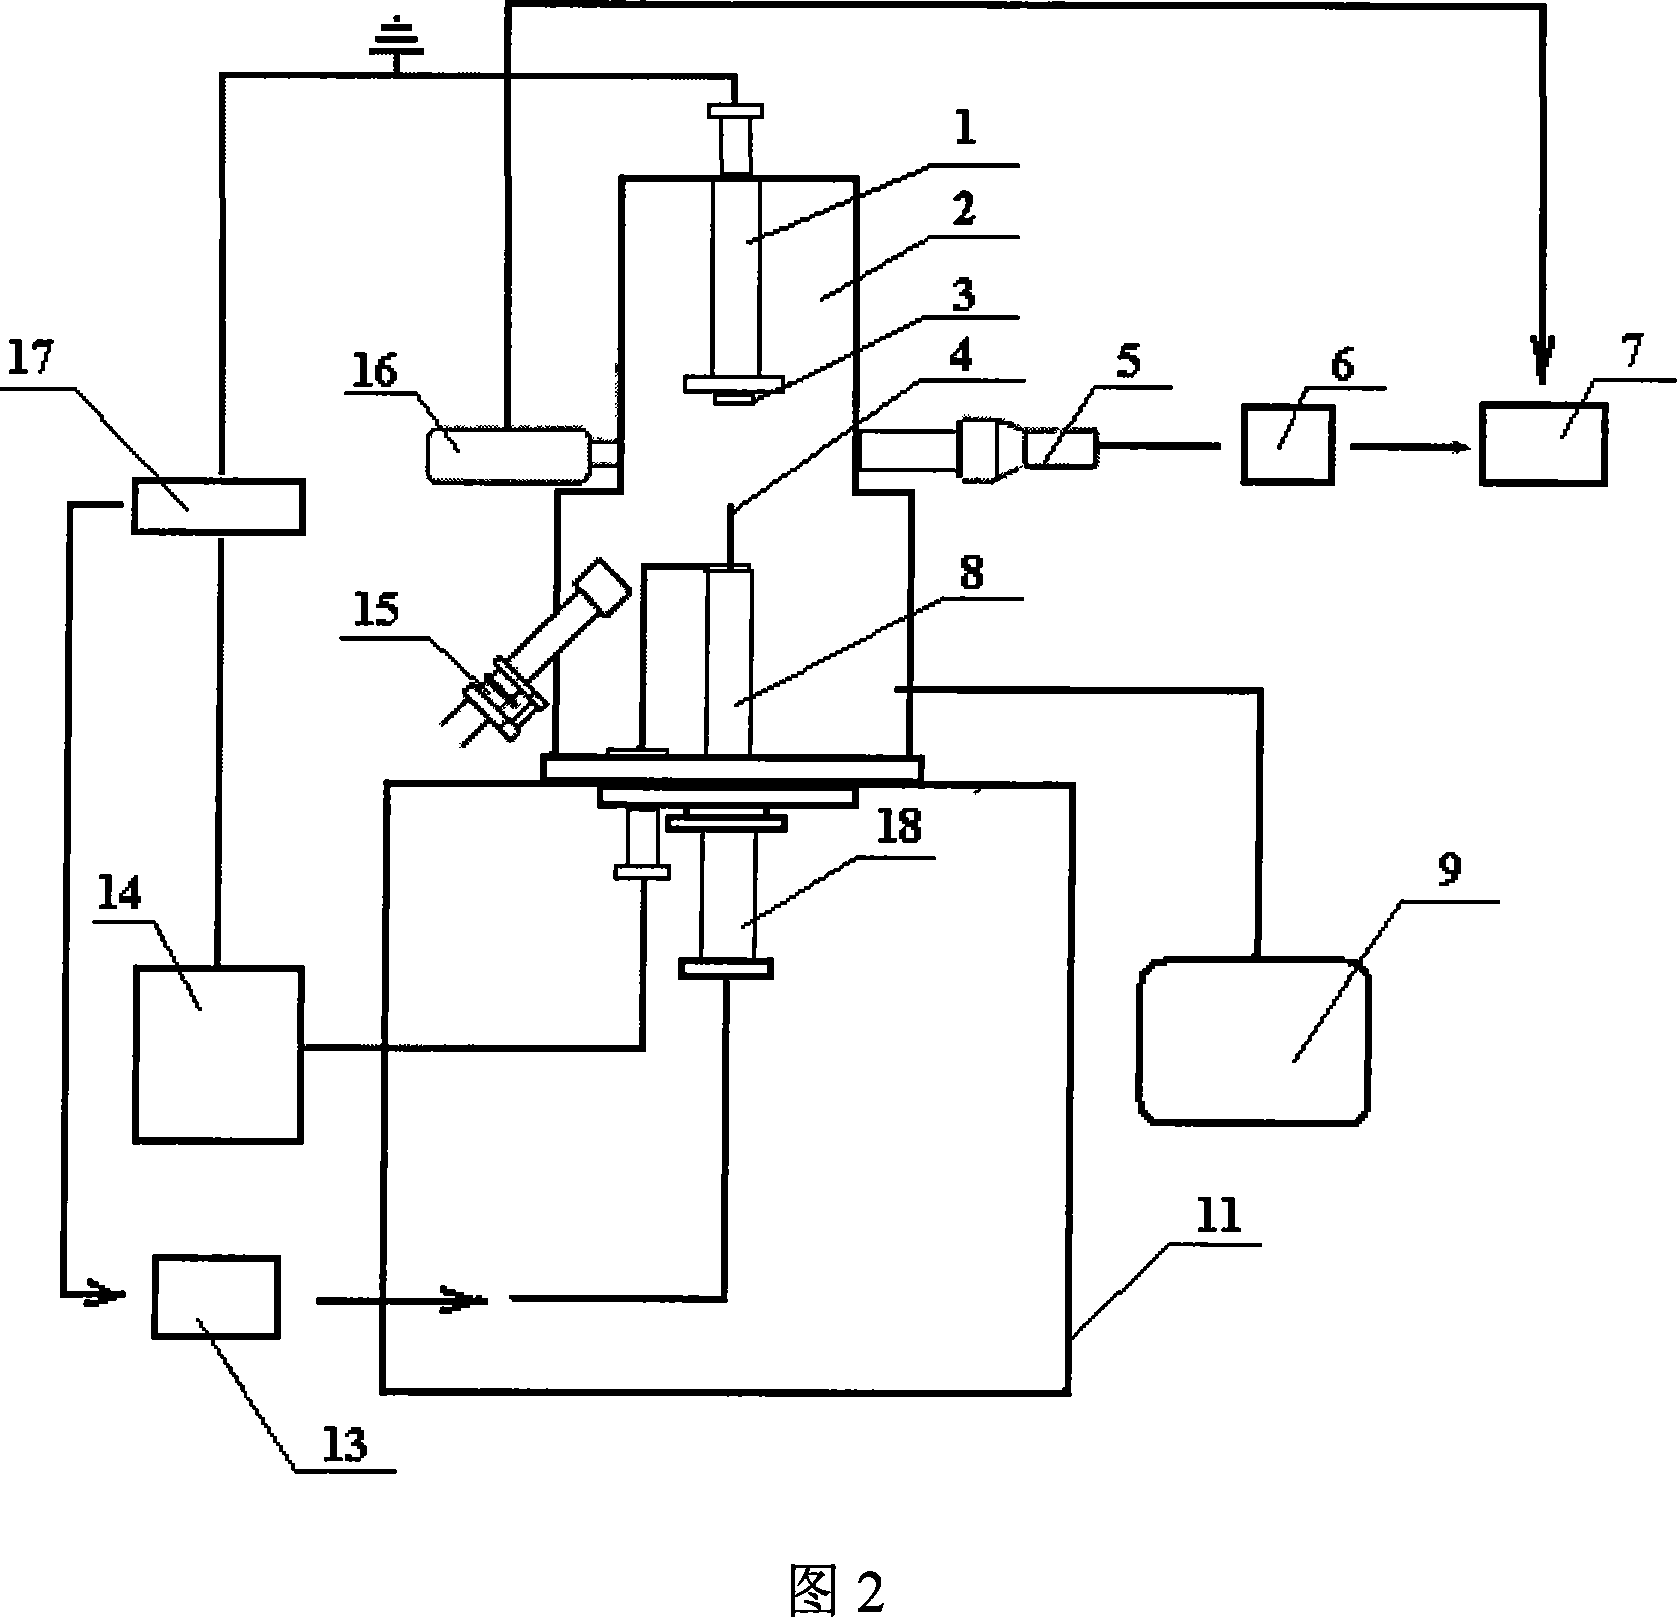 Test apparatus for breakdown strength of material